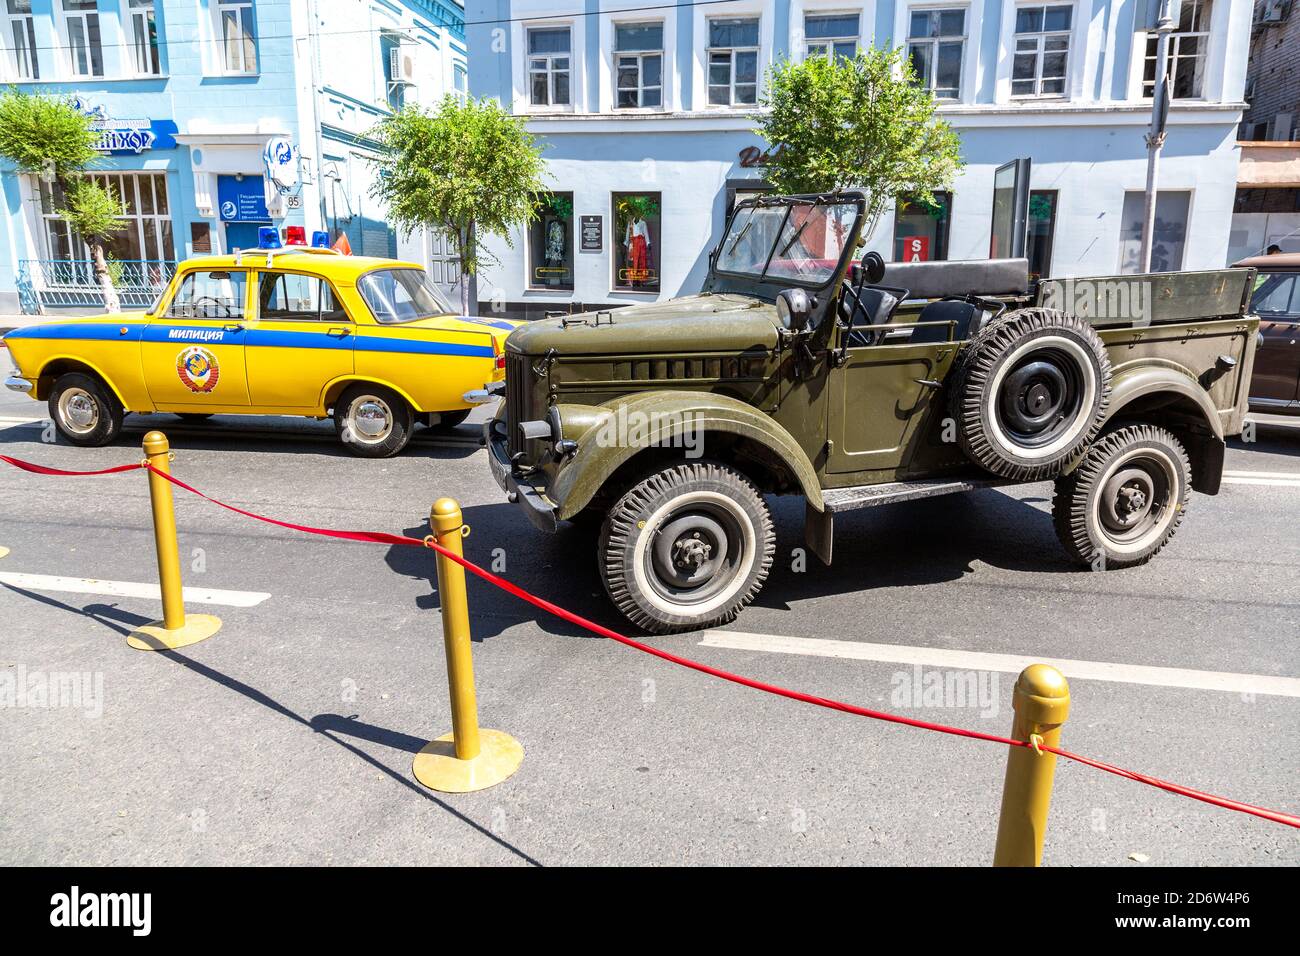 Samara, Russia - June 12, 2019: Vintage Soviet police automobile Moskvich 412 and off-road vehicle GAZ 69 parked up at the city street Stock Photo